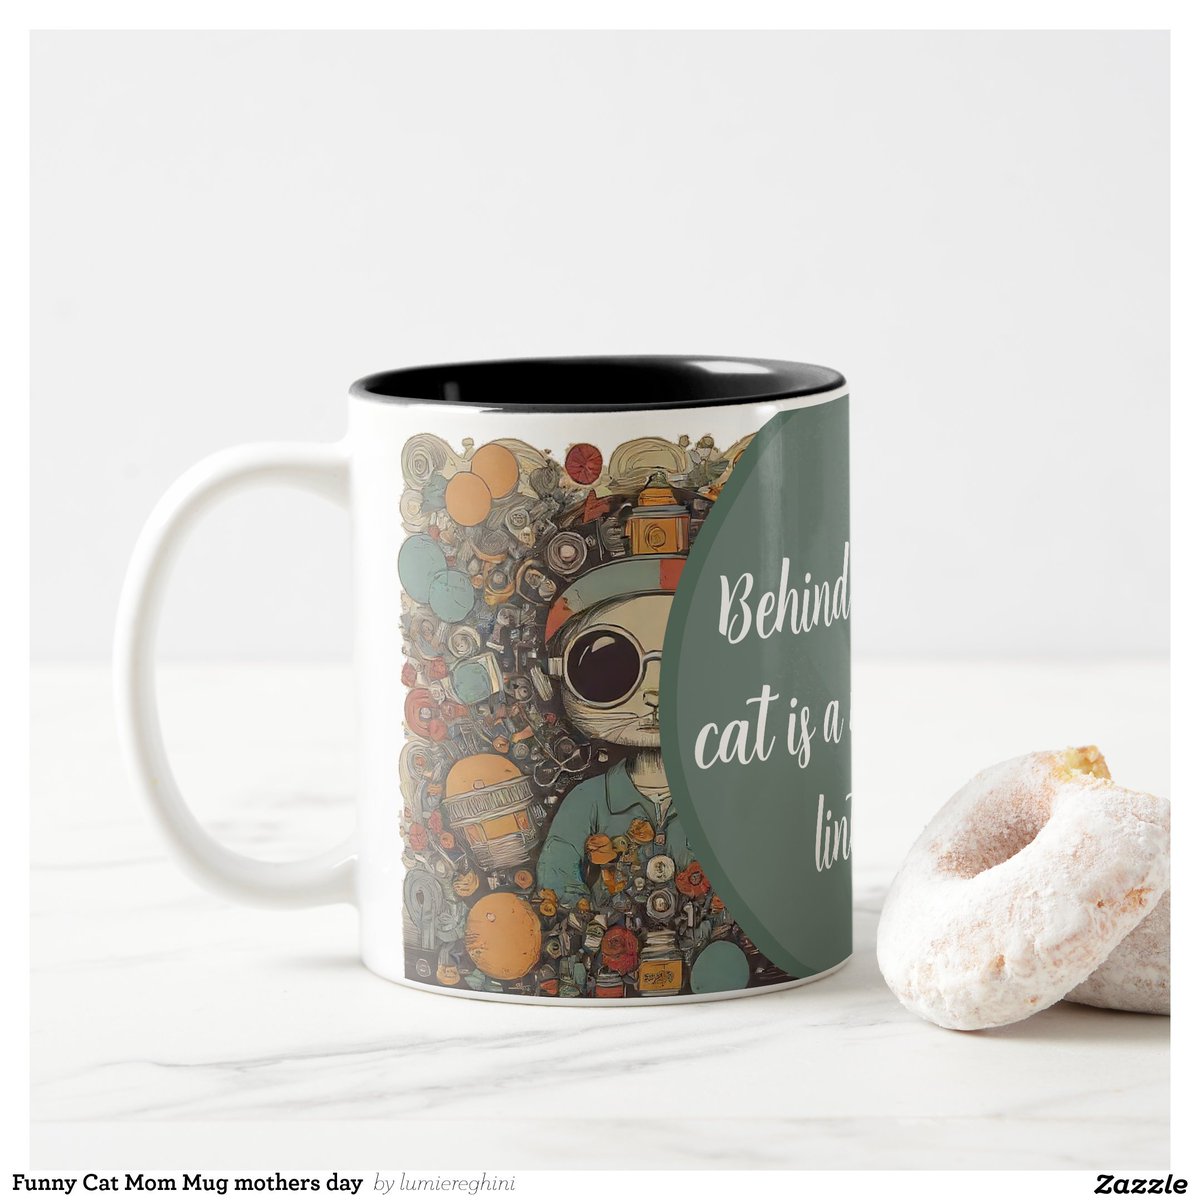 🐾 Brighten your morning with our 'Pawsitively Purrrfect' Funny Cat Mom Mug! Get yours today and start your day with a smile! 🌟 #FunnyCatMug #CatLoverGiftIdeas #HilariousQuoteMug #WhimsicalCatArt #KittyHumor #PurrfectGifts #FelineFun #CatThemedMugs 🐱 zazzle.com/z/0zfdxdnv?rf=…